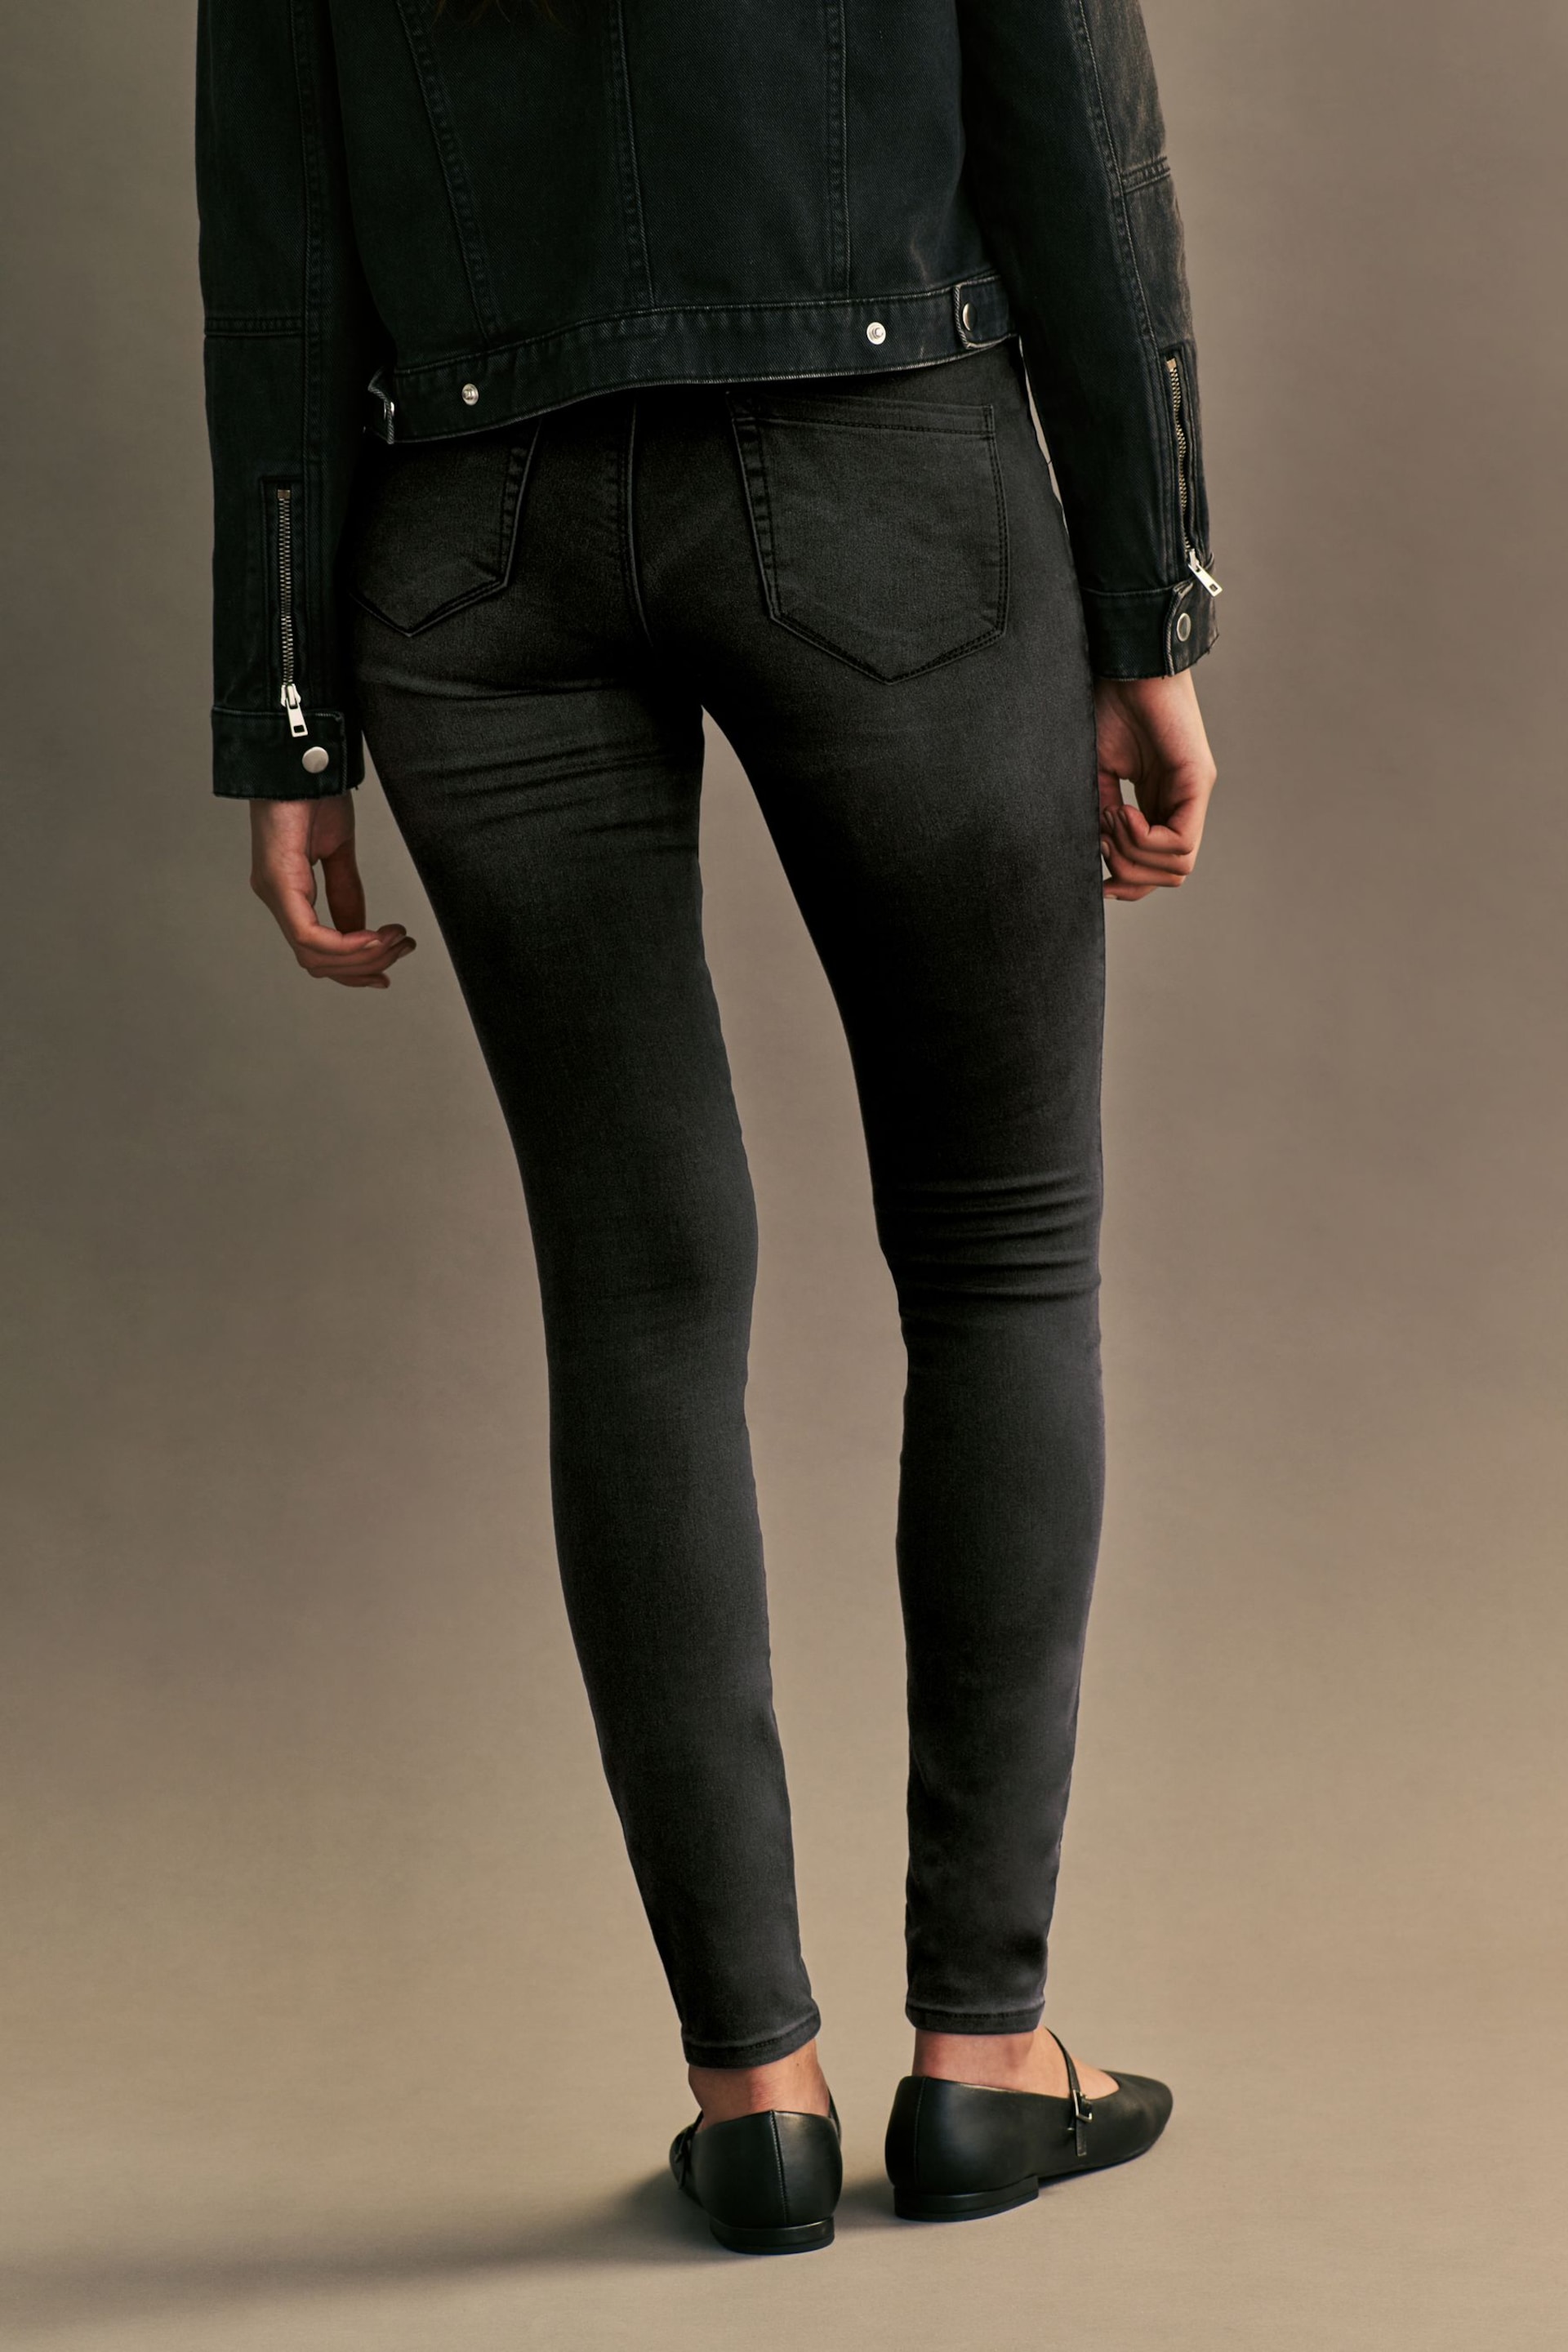 ONLY Black High Waisted Stretch Skinny Royal Jeans - Image 2 of 7